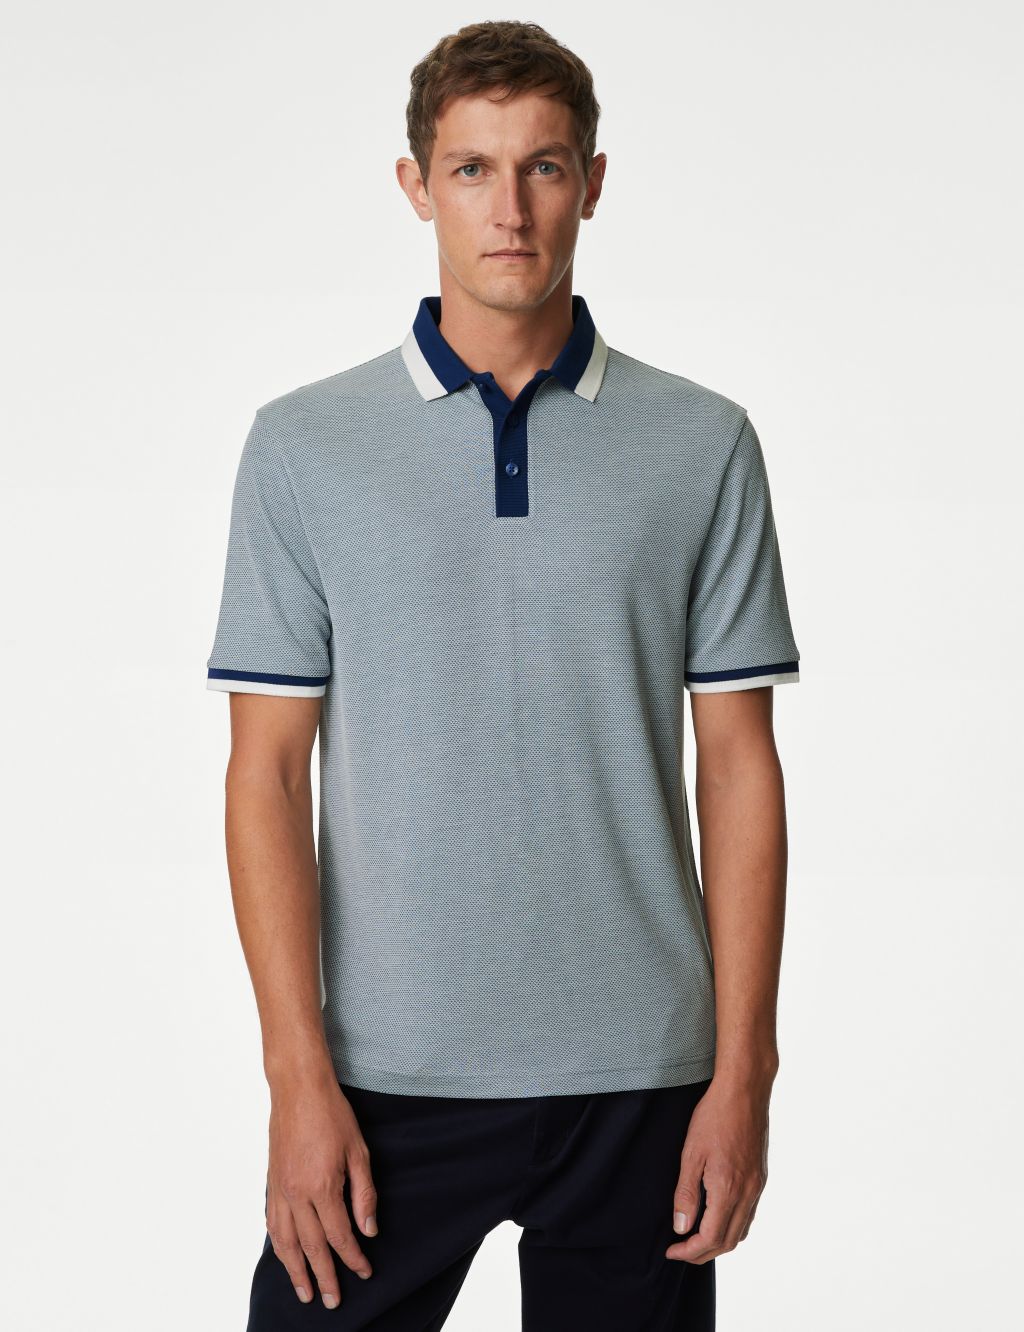 Tipped Polo Shirt image 1